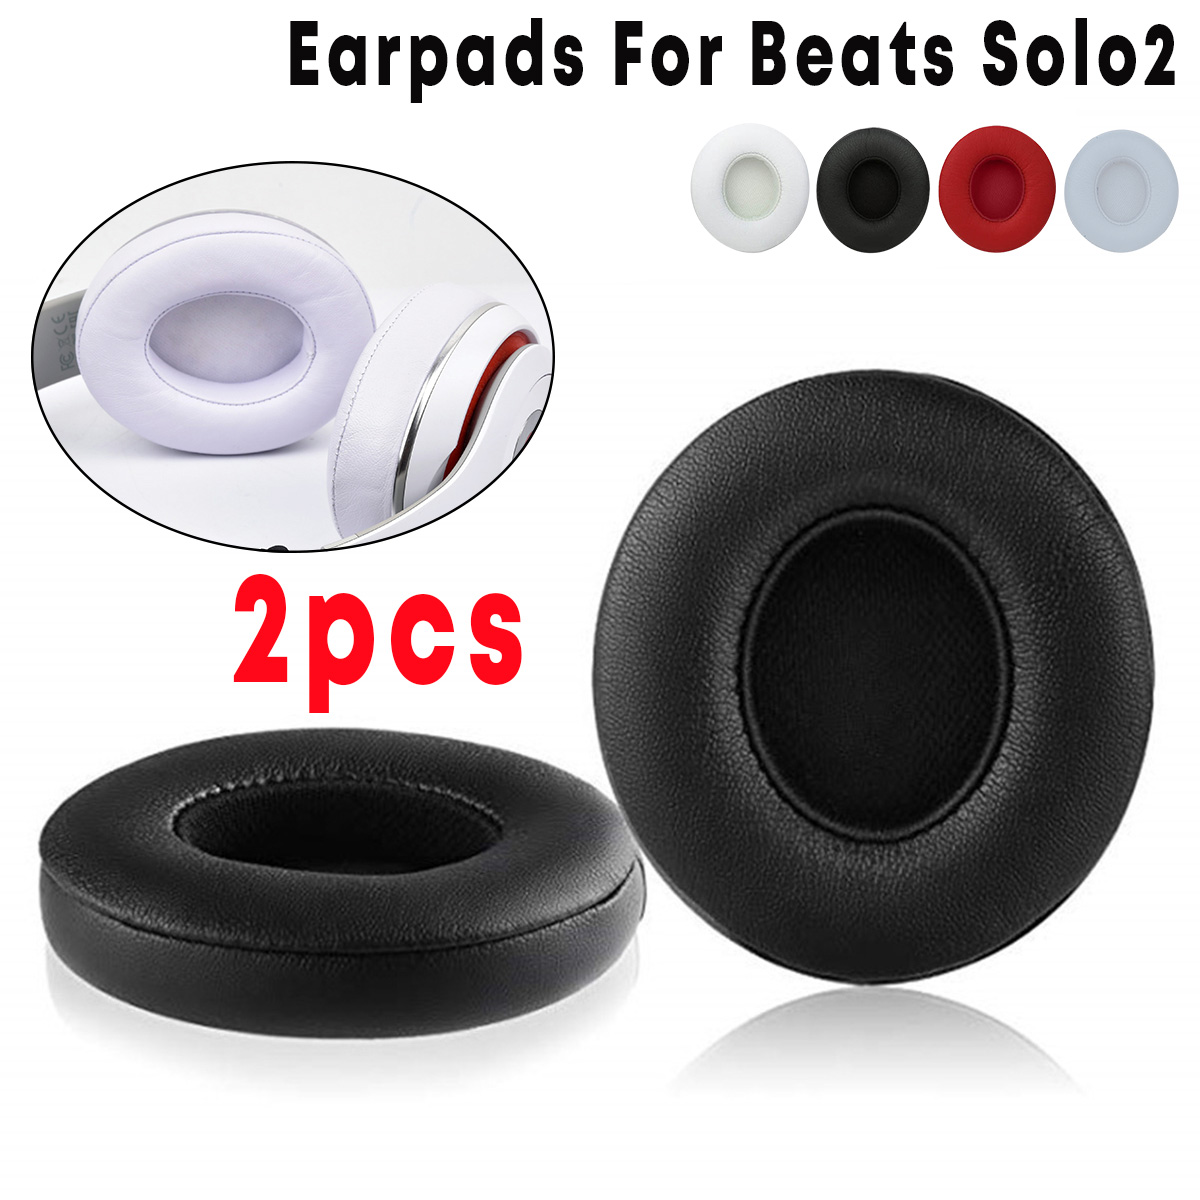 2Pcs-Replacement-Ear-Pads-Soft-Cushion-Cover-Earmuff-for-Beats-Solo-2-Headphone-1555379-5